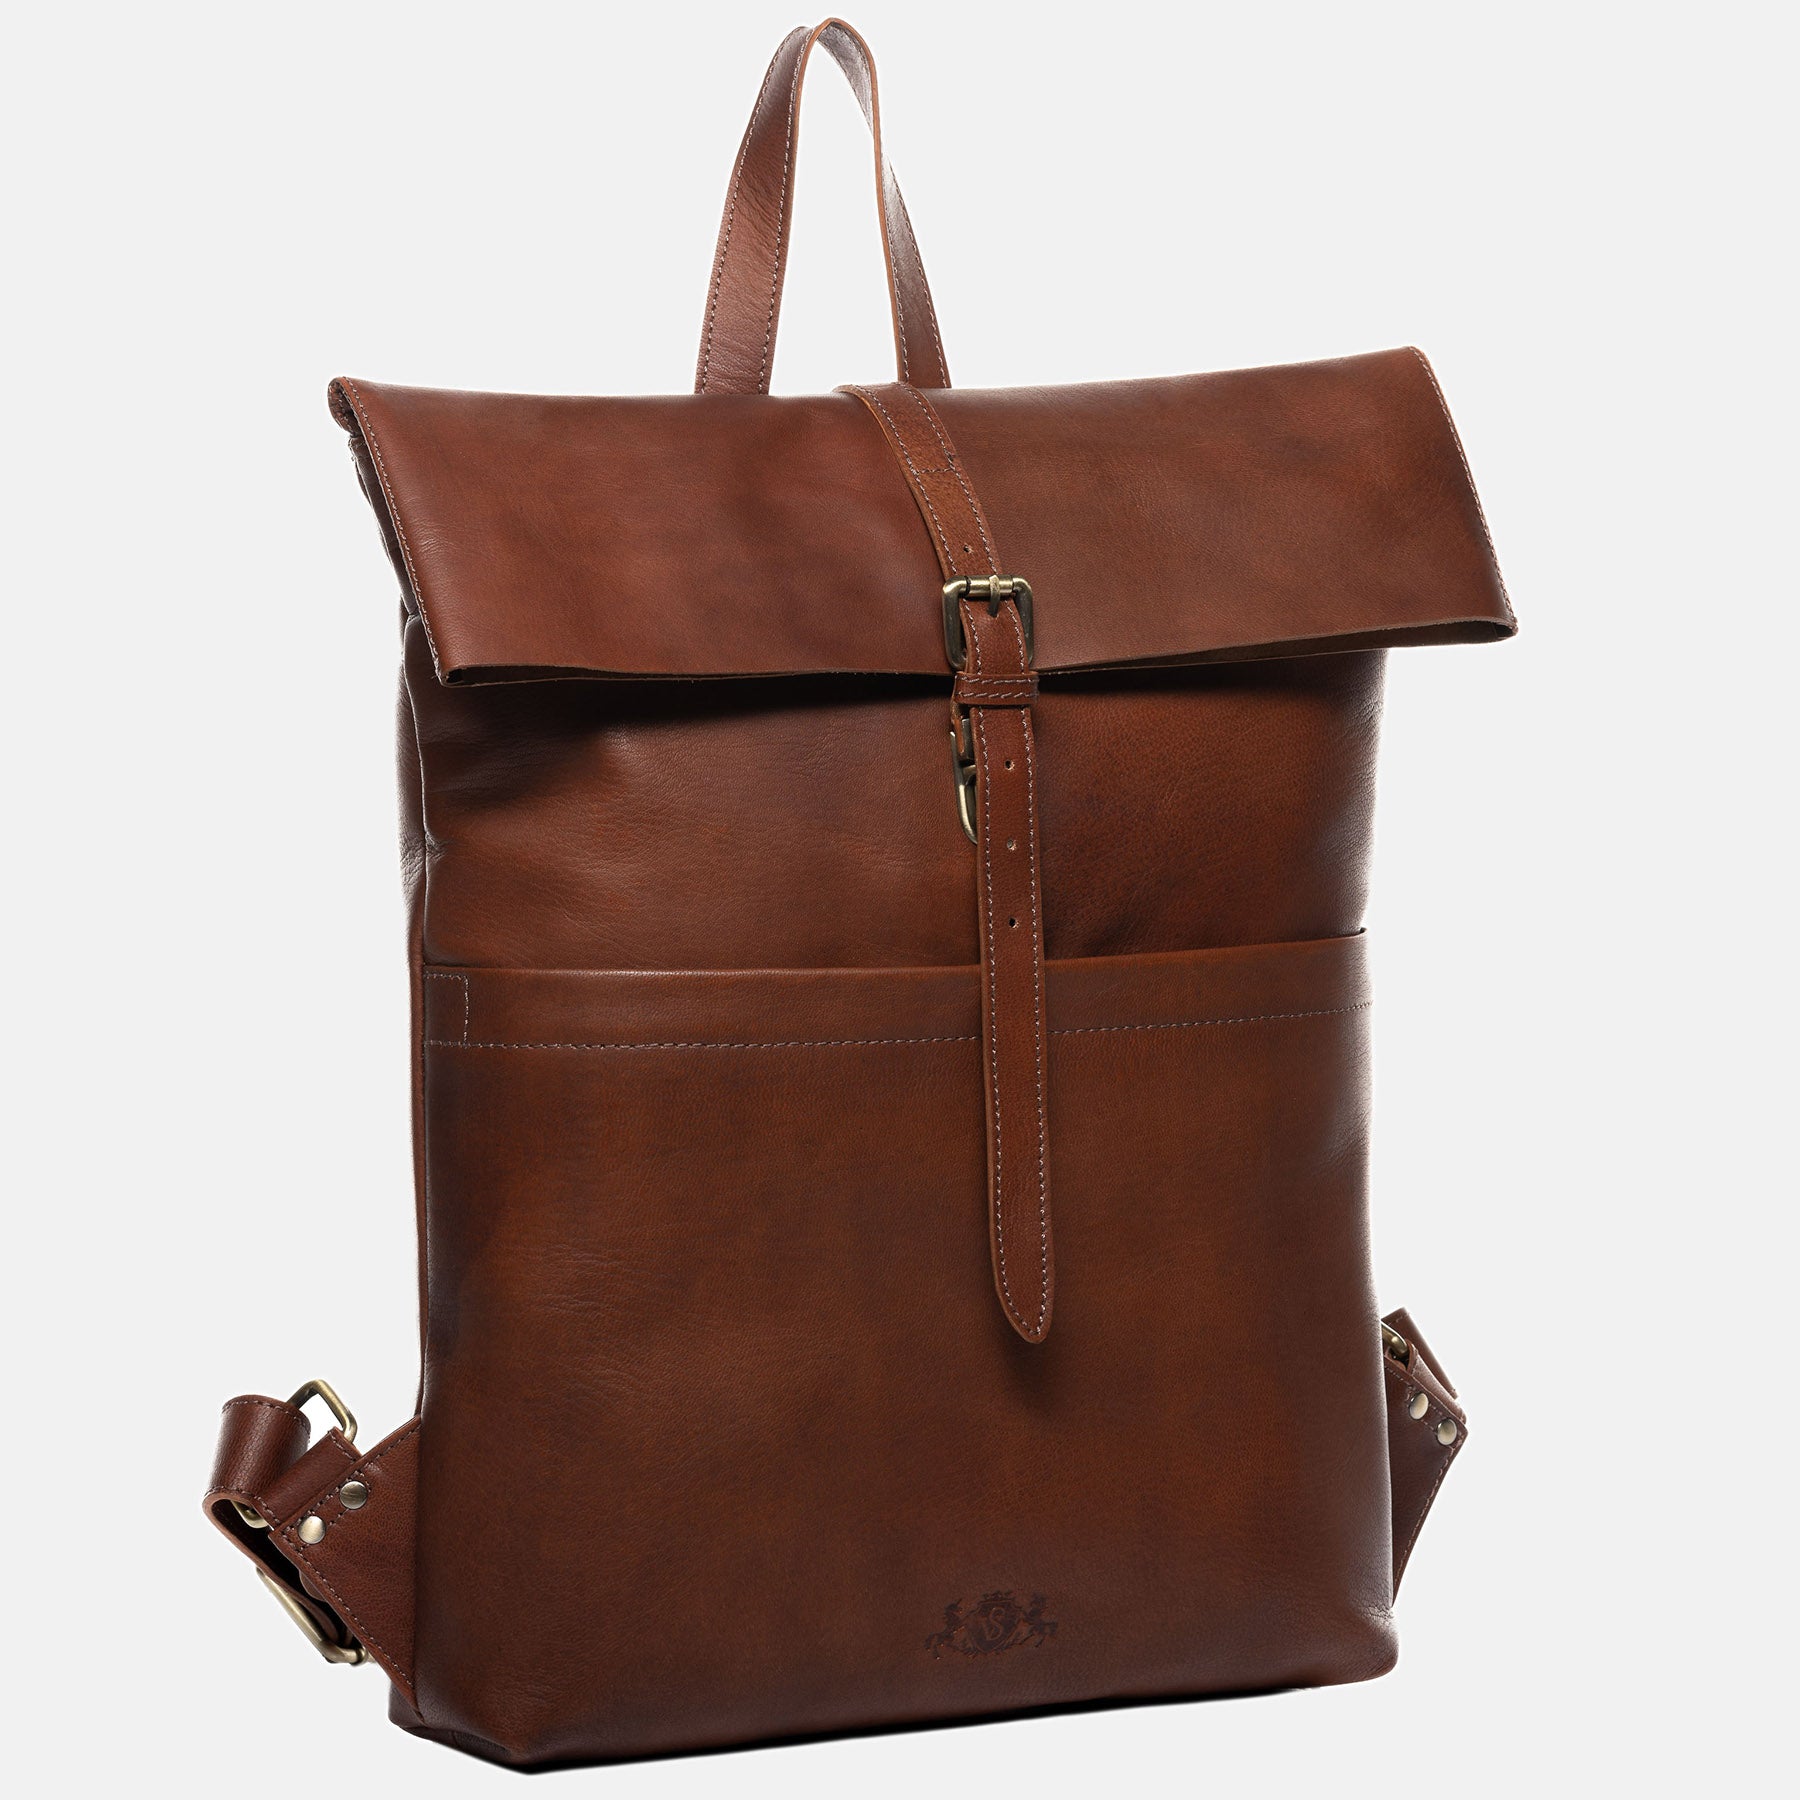 Rolltop backpack CLAY smooth leather light brown